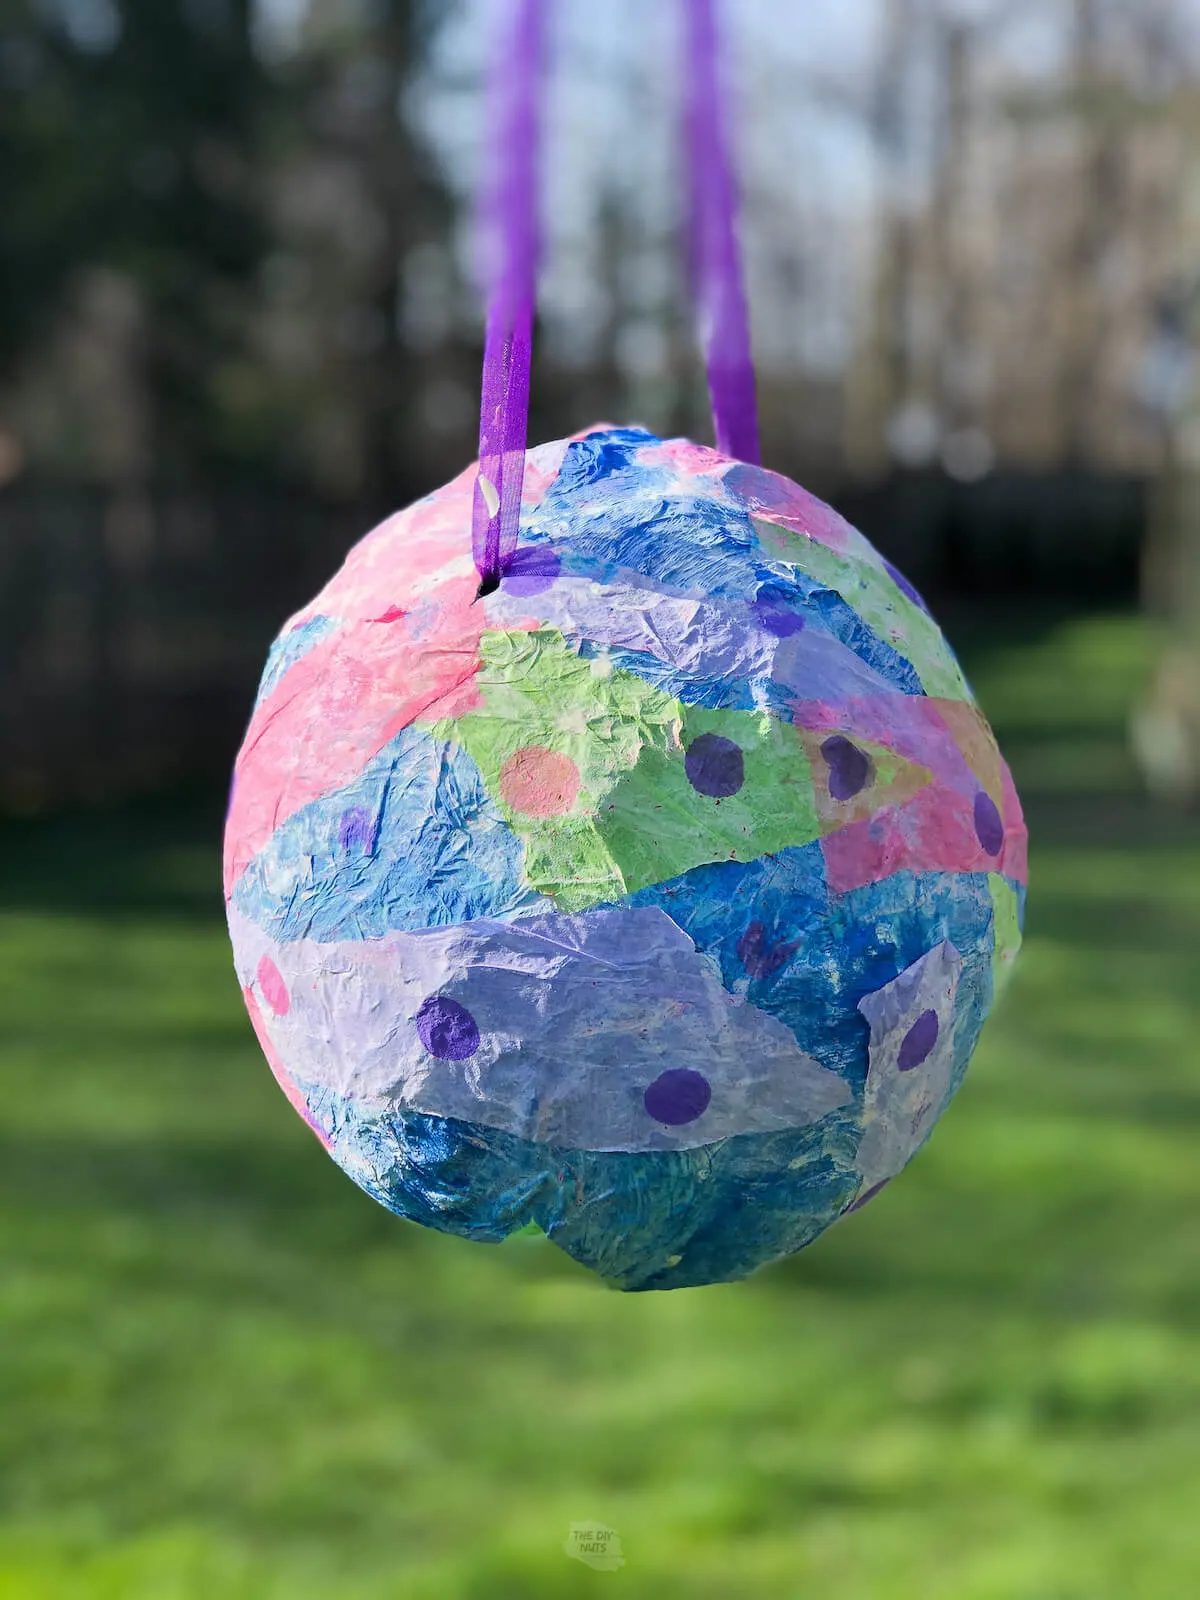 colorful piñata made from a balloon hanging outside.